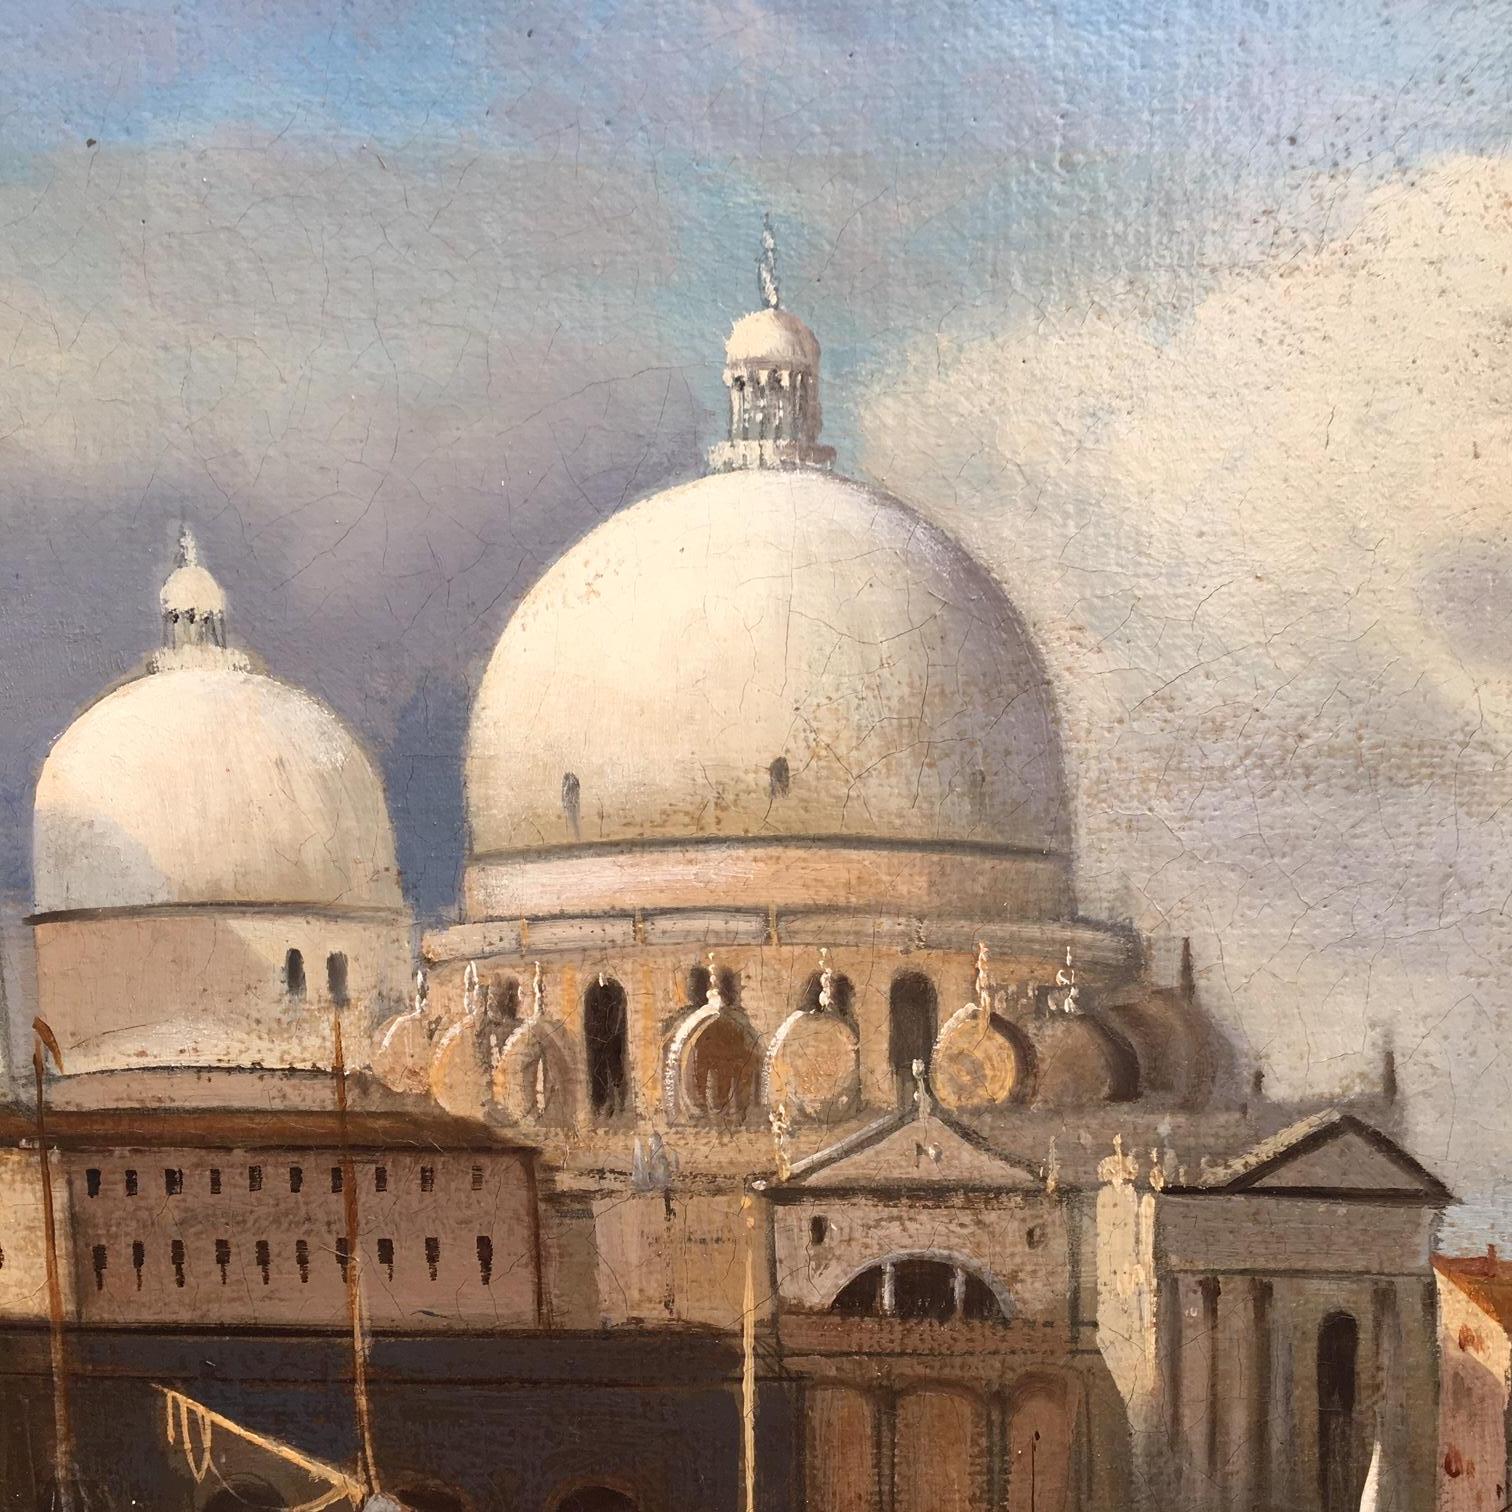 VENICE SAN GIORGIO ISLAND- In the Manner of Canaletto - Oil on Canvas Painting For Sale 1